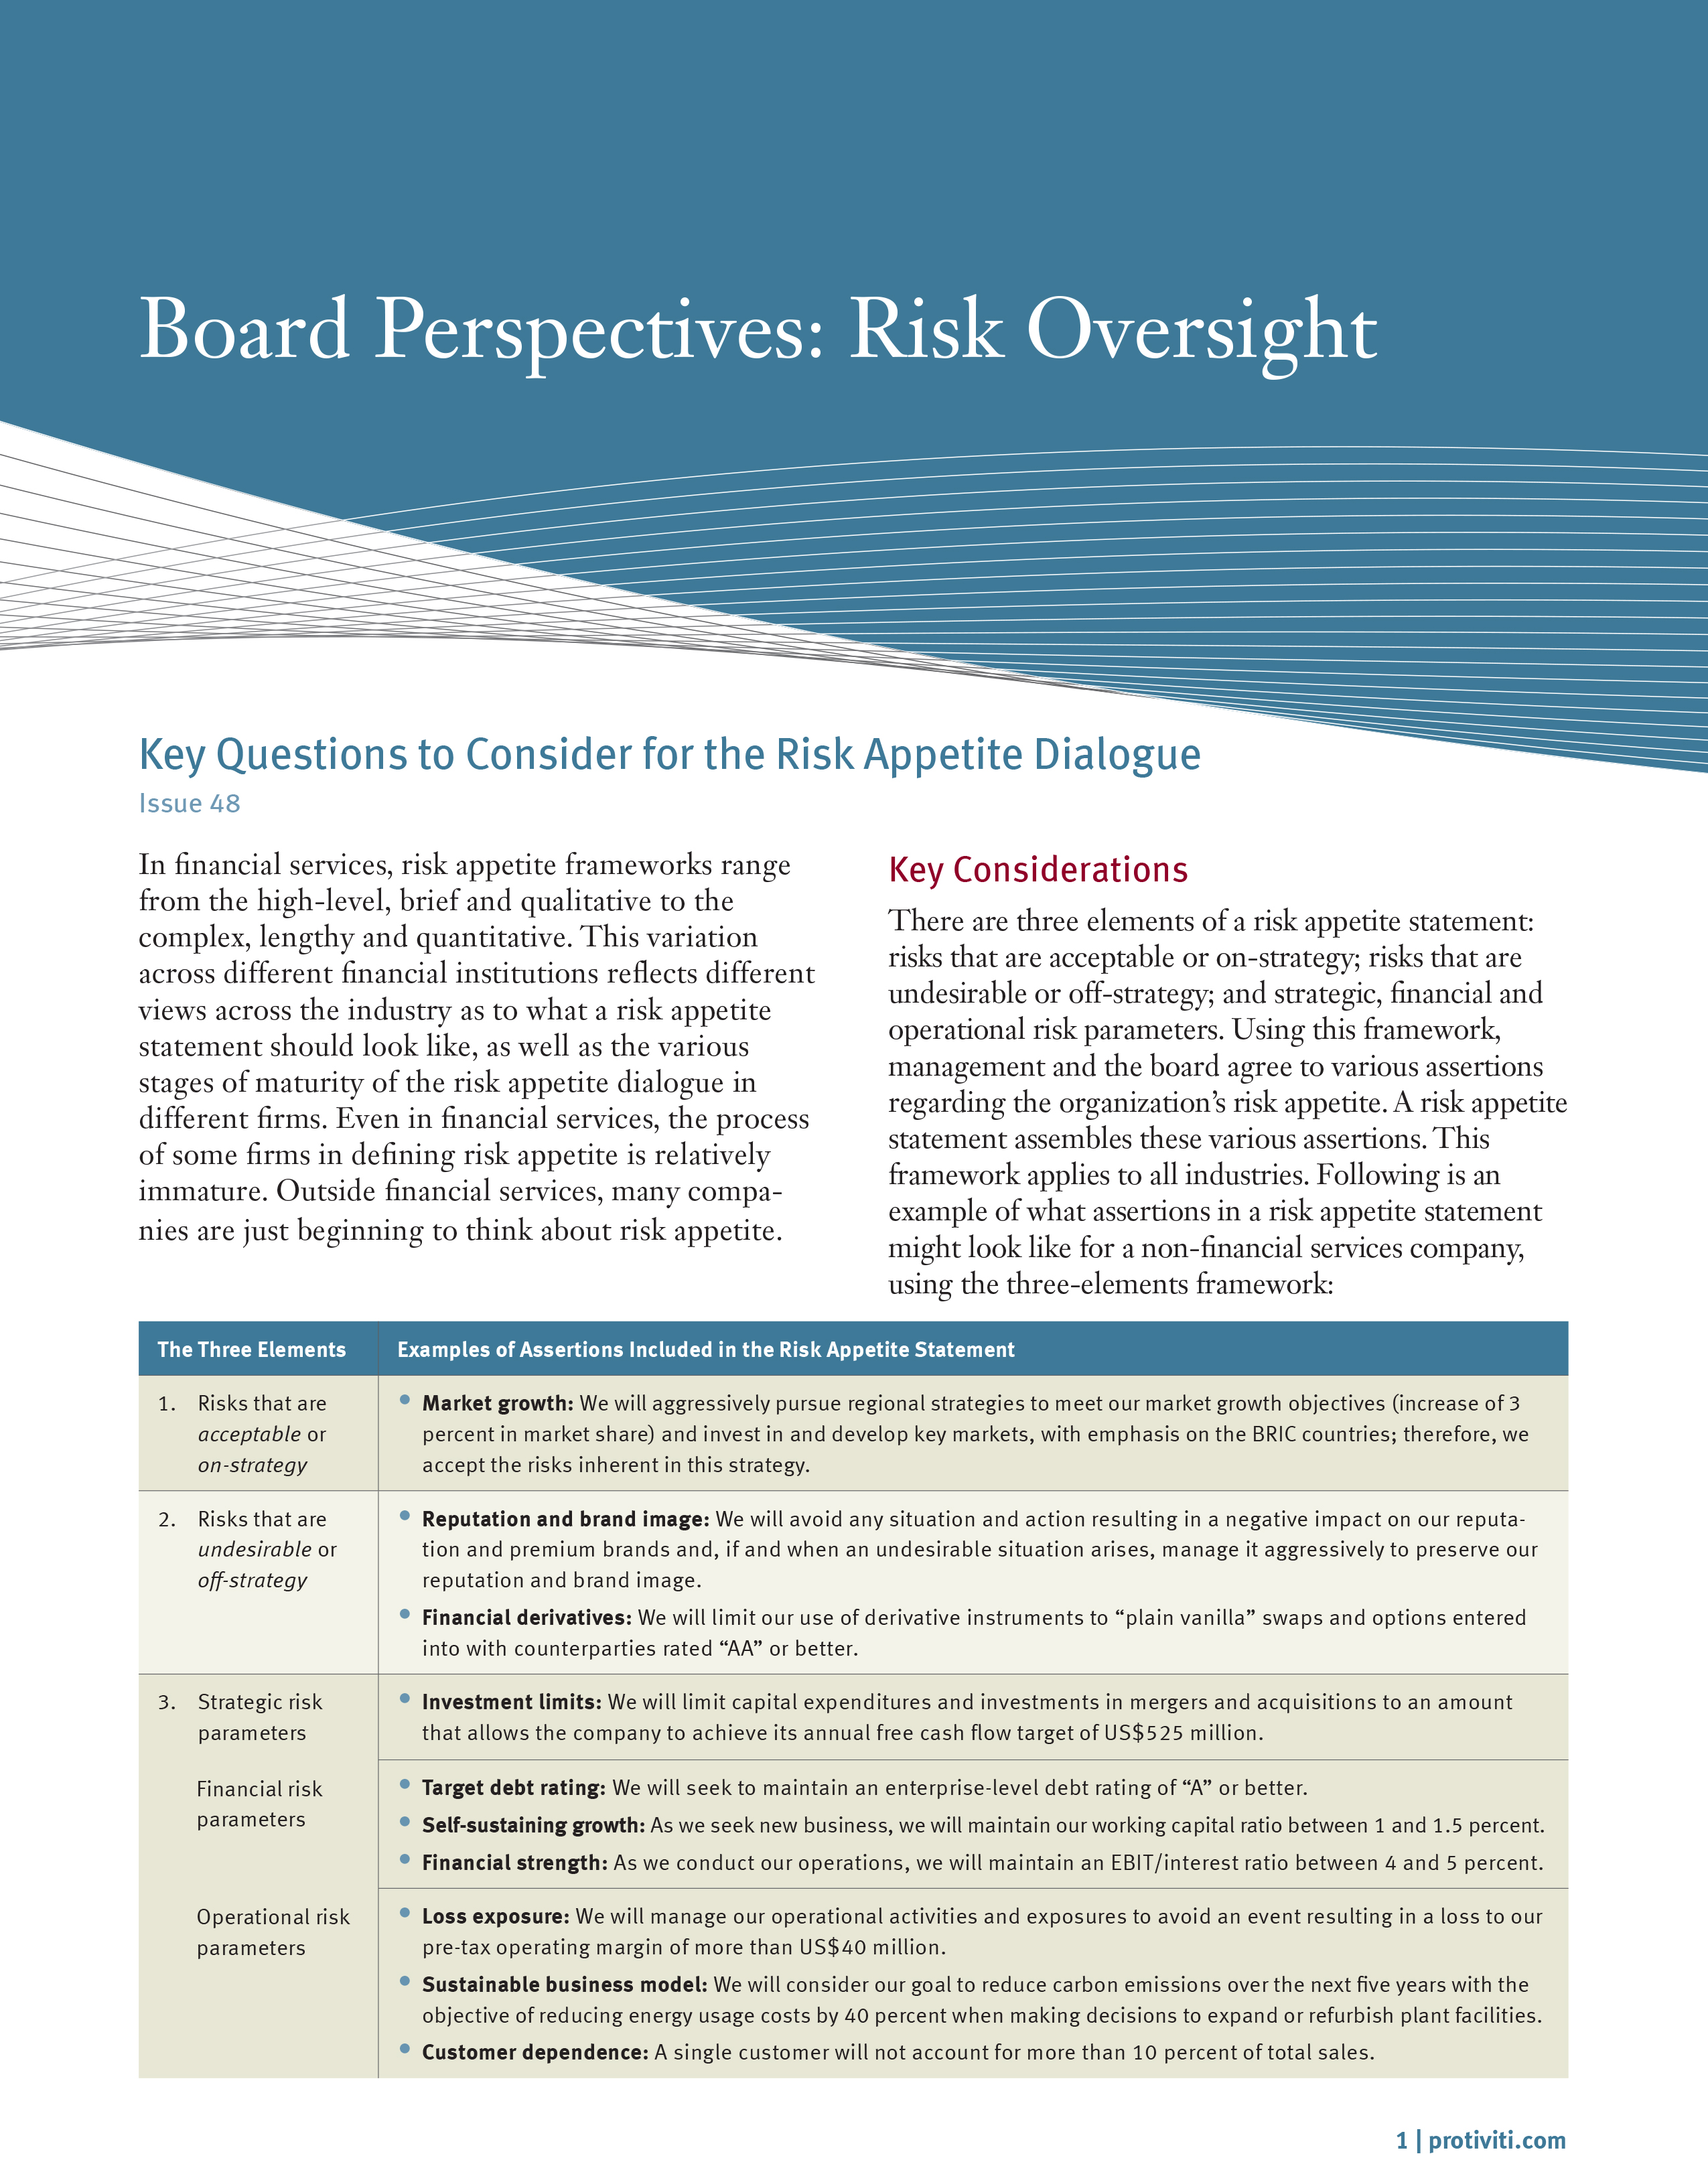 Screenshot of the first page of Key Questions to Consider for the Risk Appetite Dialogue